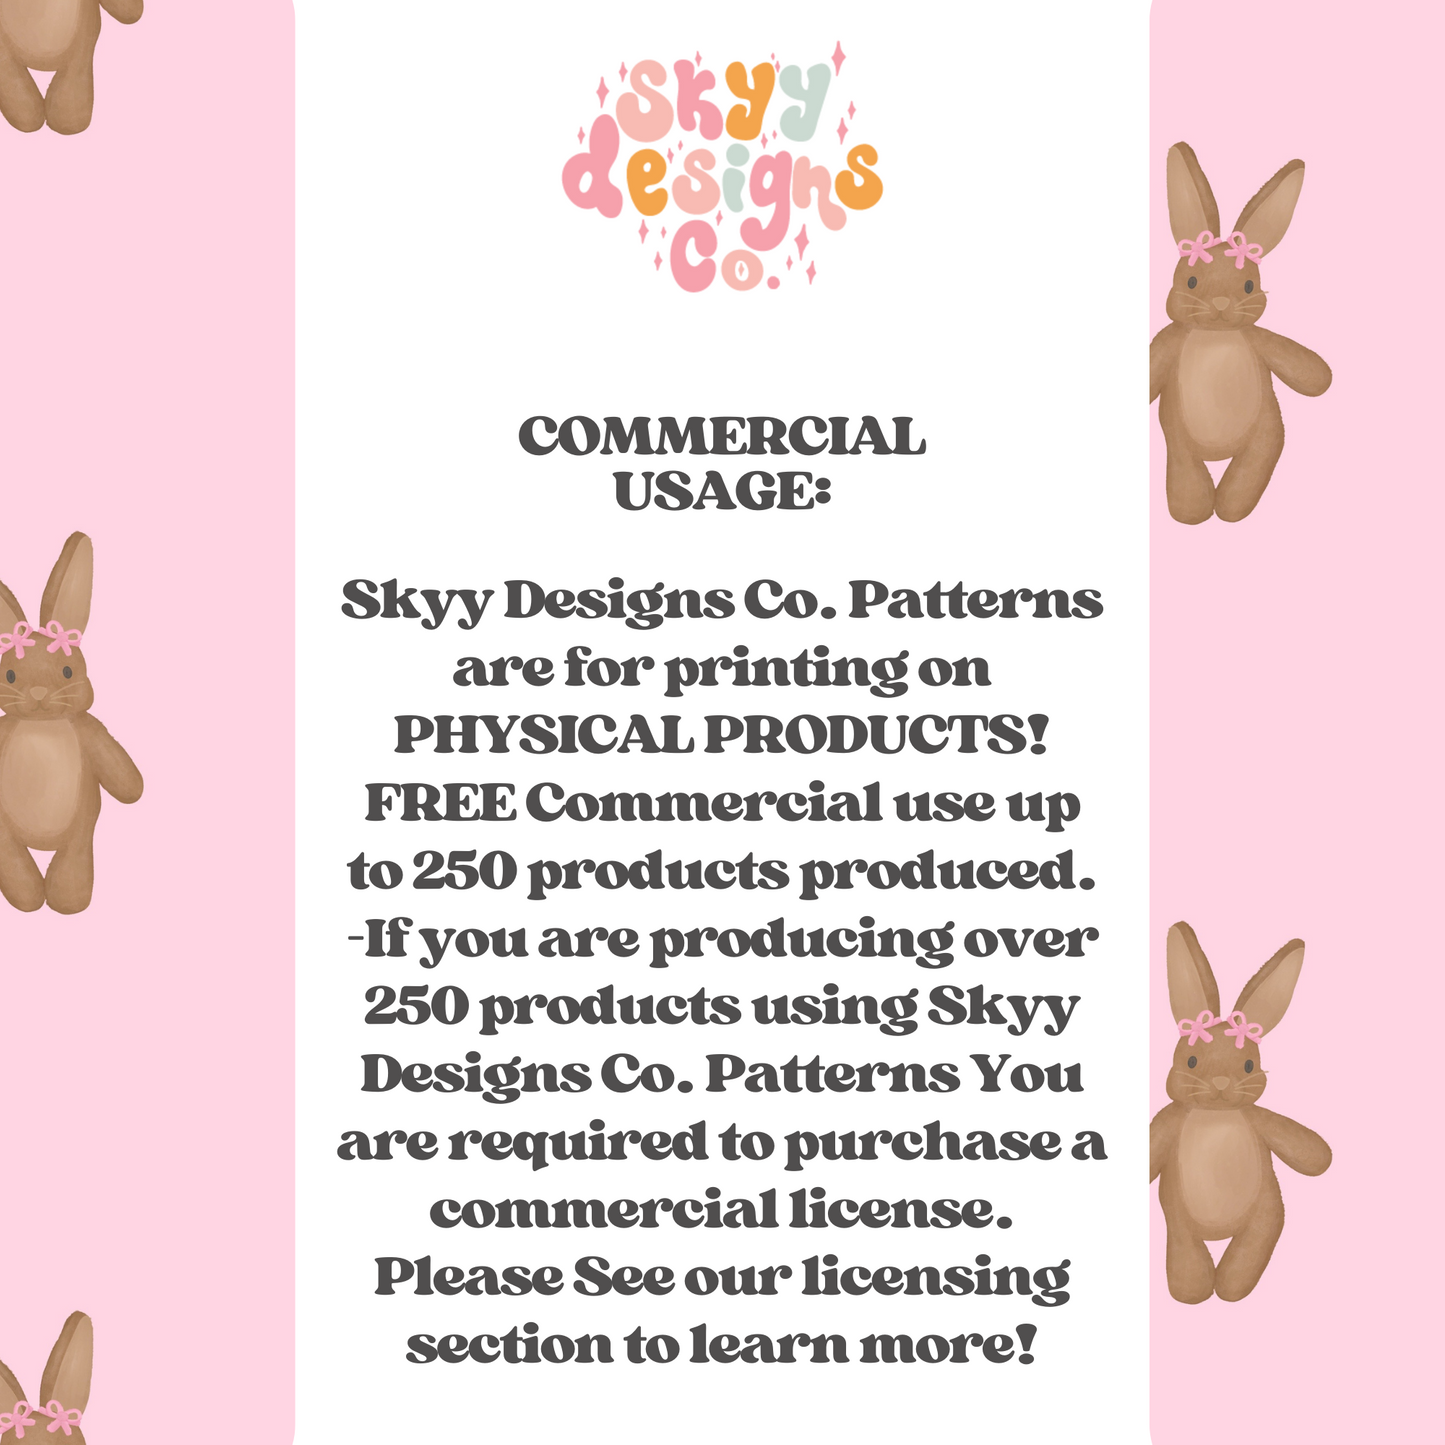 Girly Easter bunny Pattern